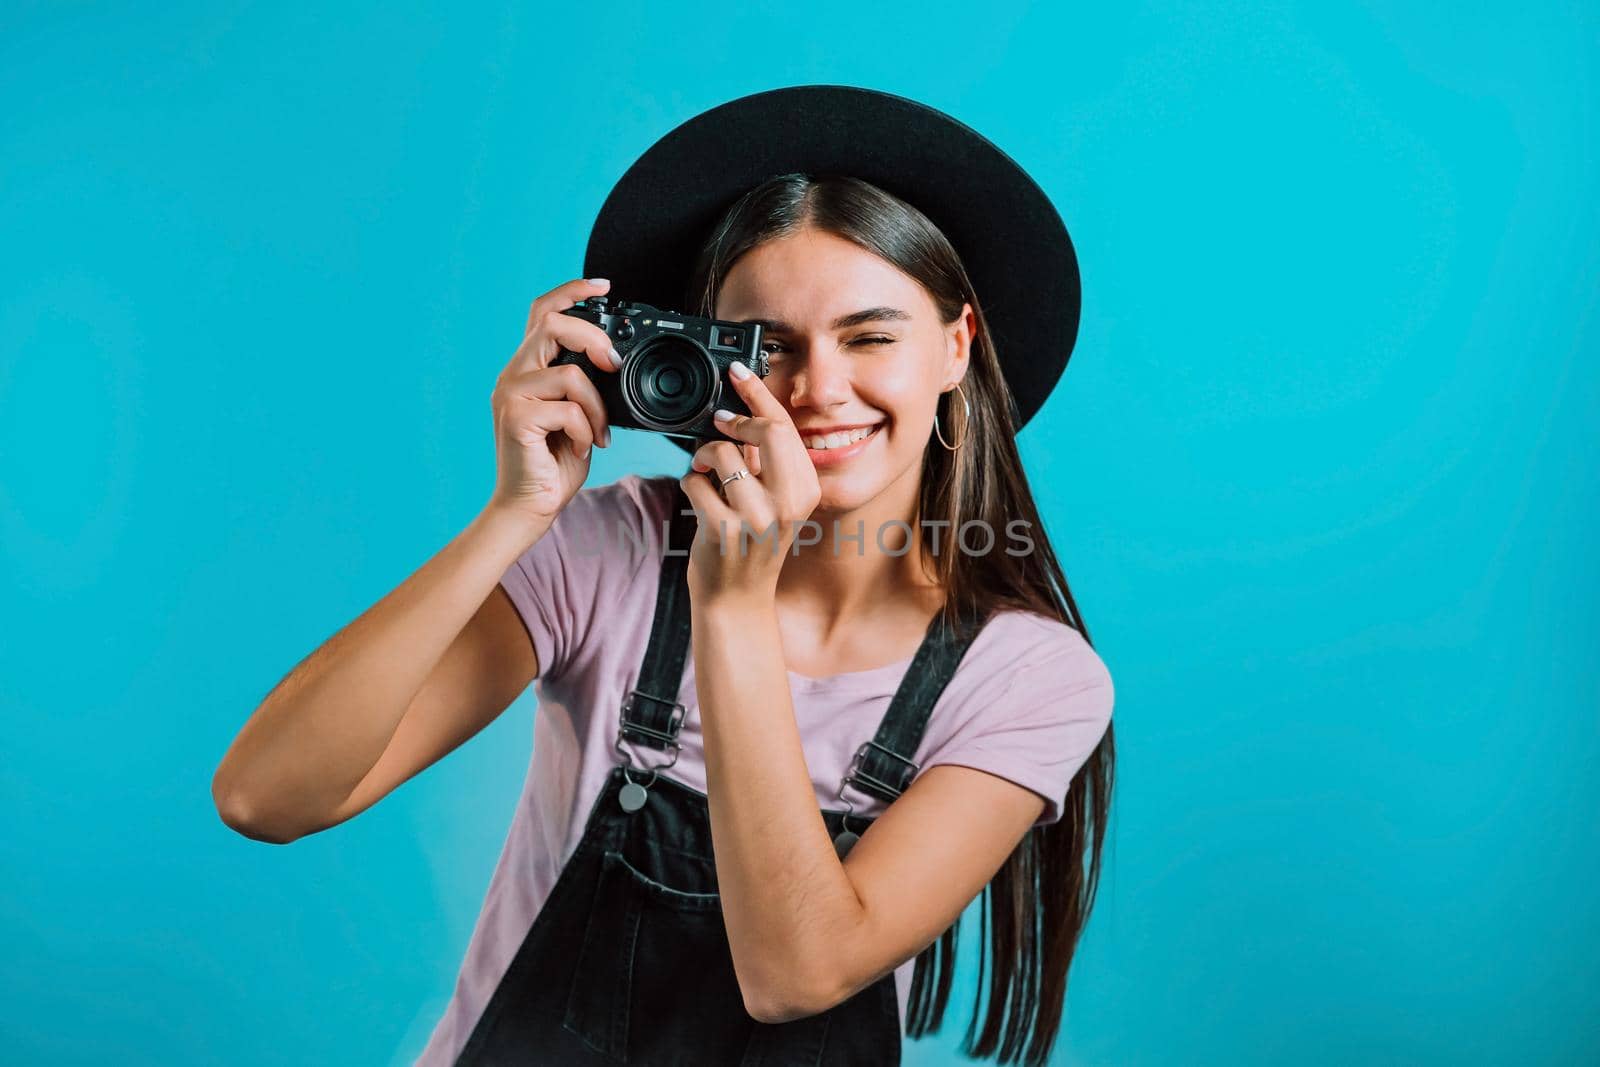 Young pretty woman in overall takes pictures with DSLR camera over blue background in studio. Girl smiling and having fun as photographer. High quality photo